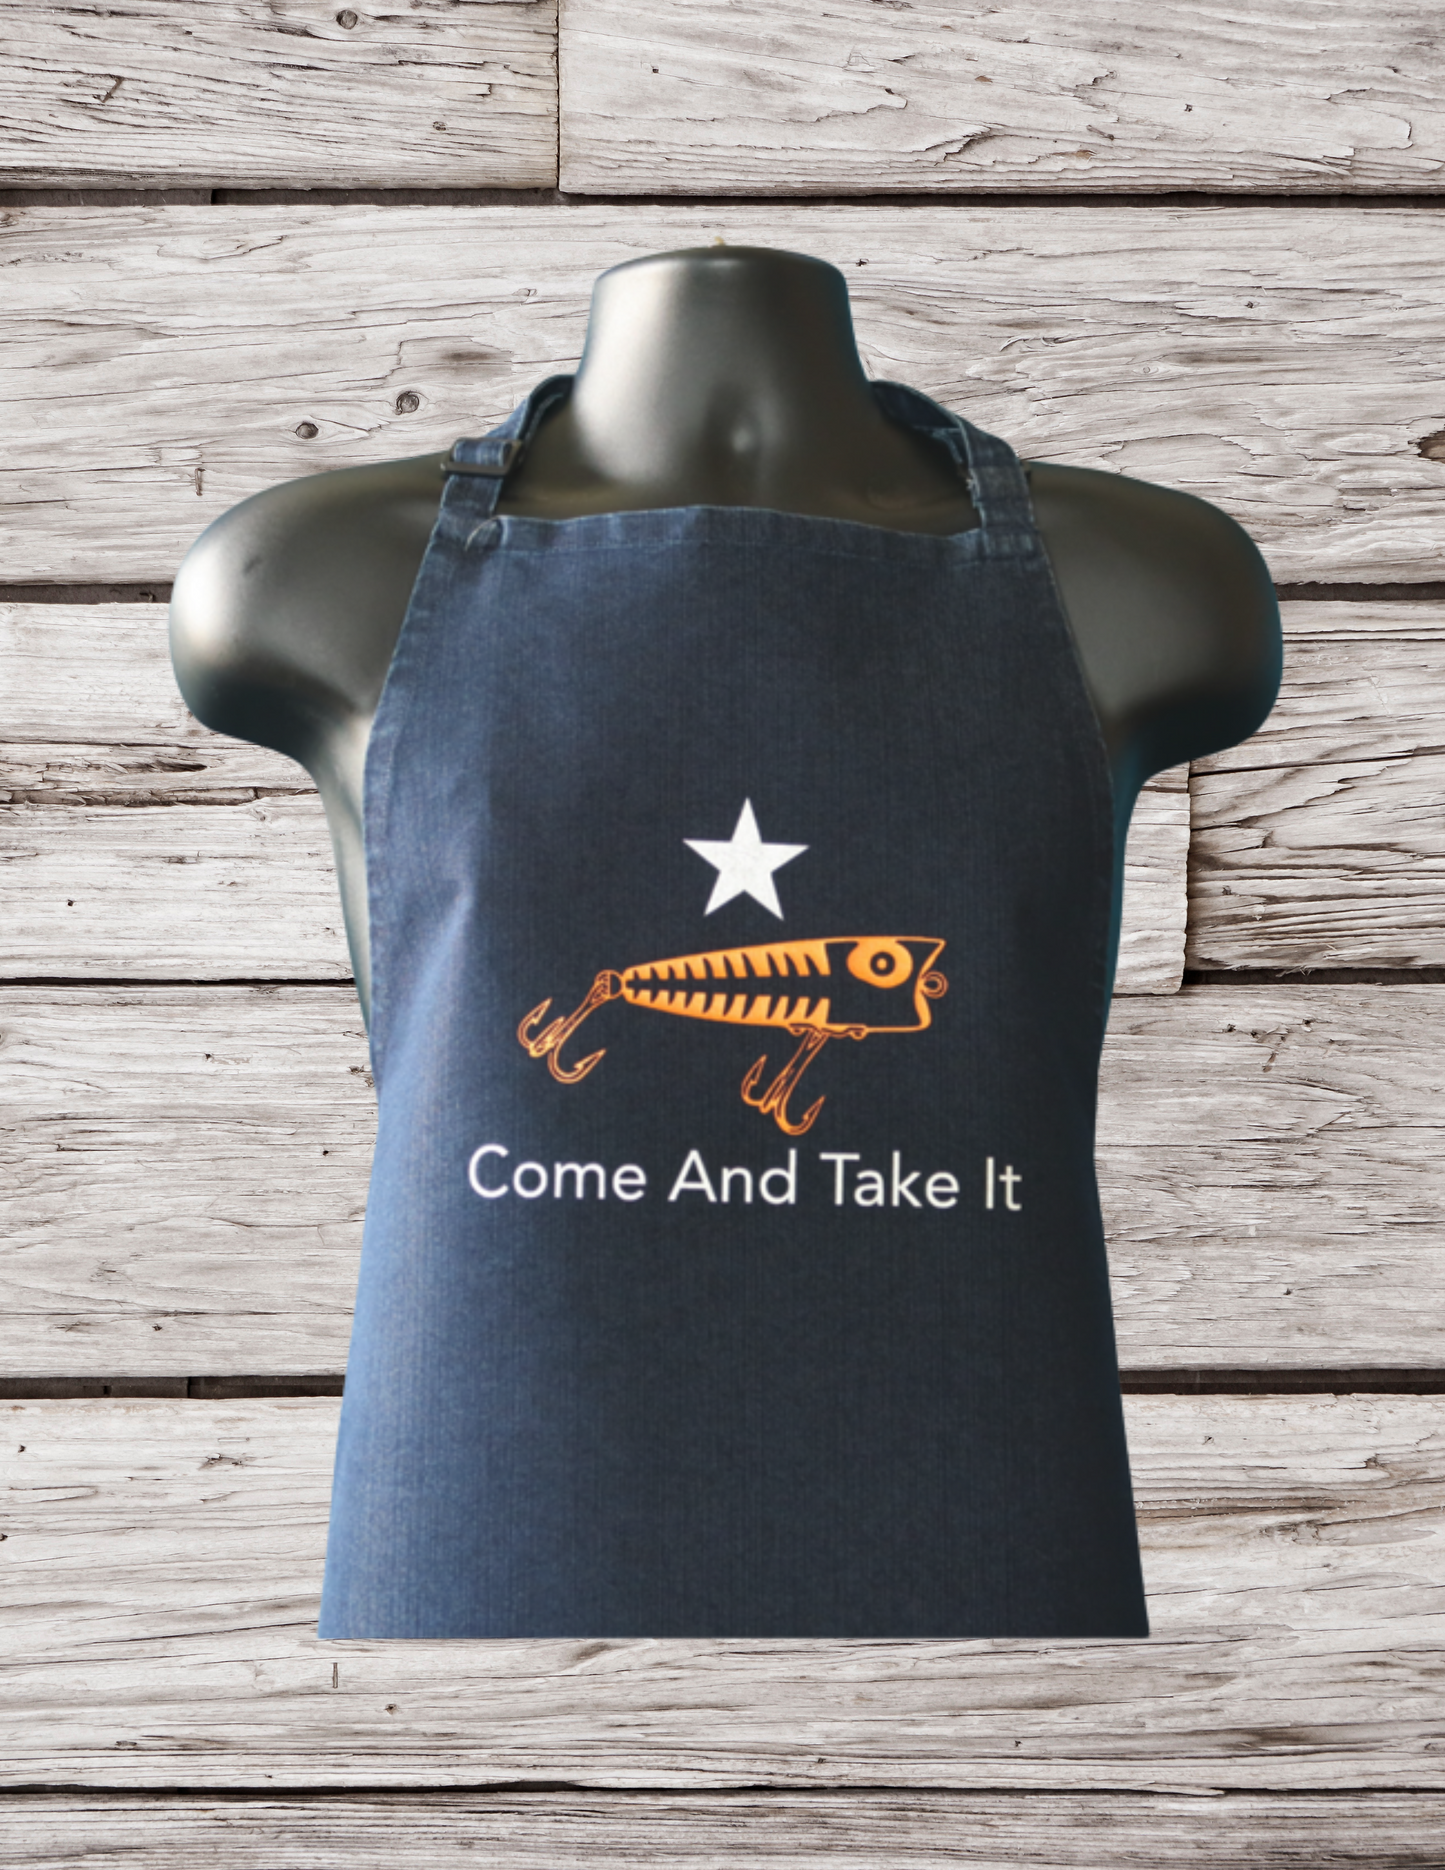 Come and Take It - Adult Kitchen Apron